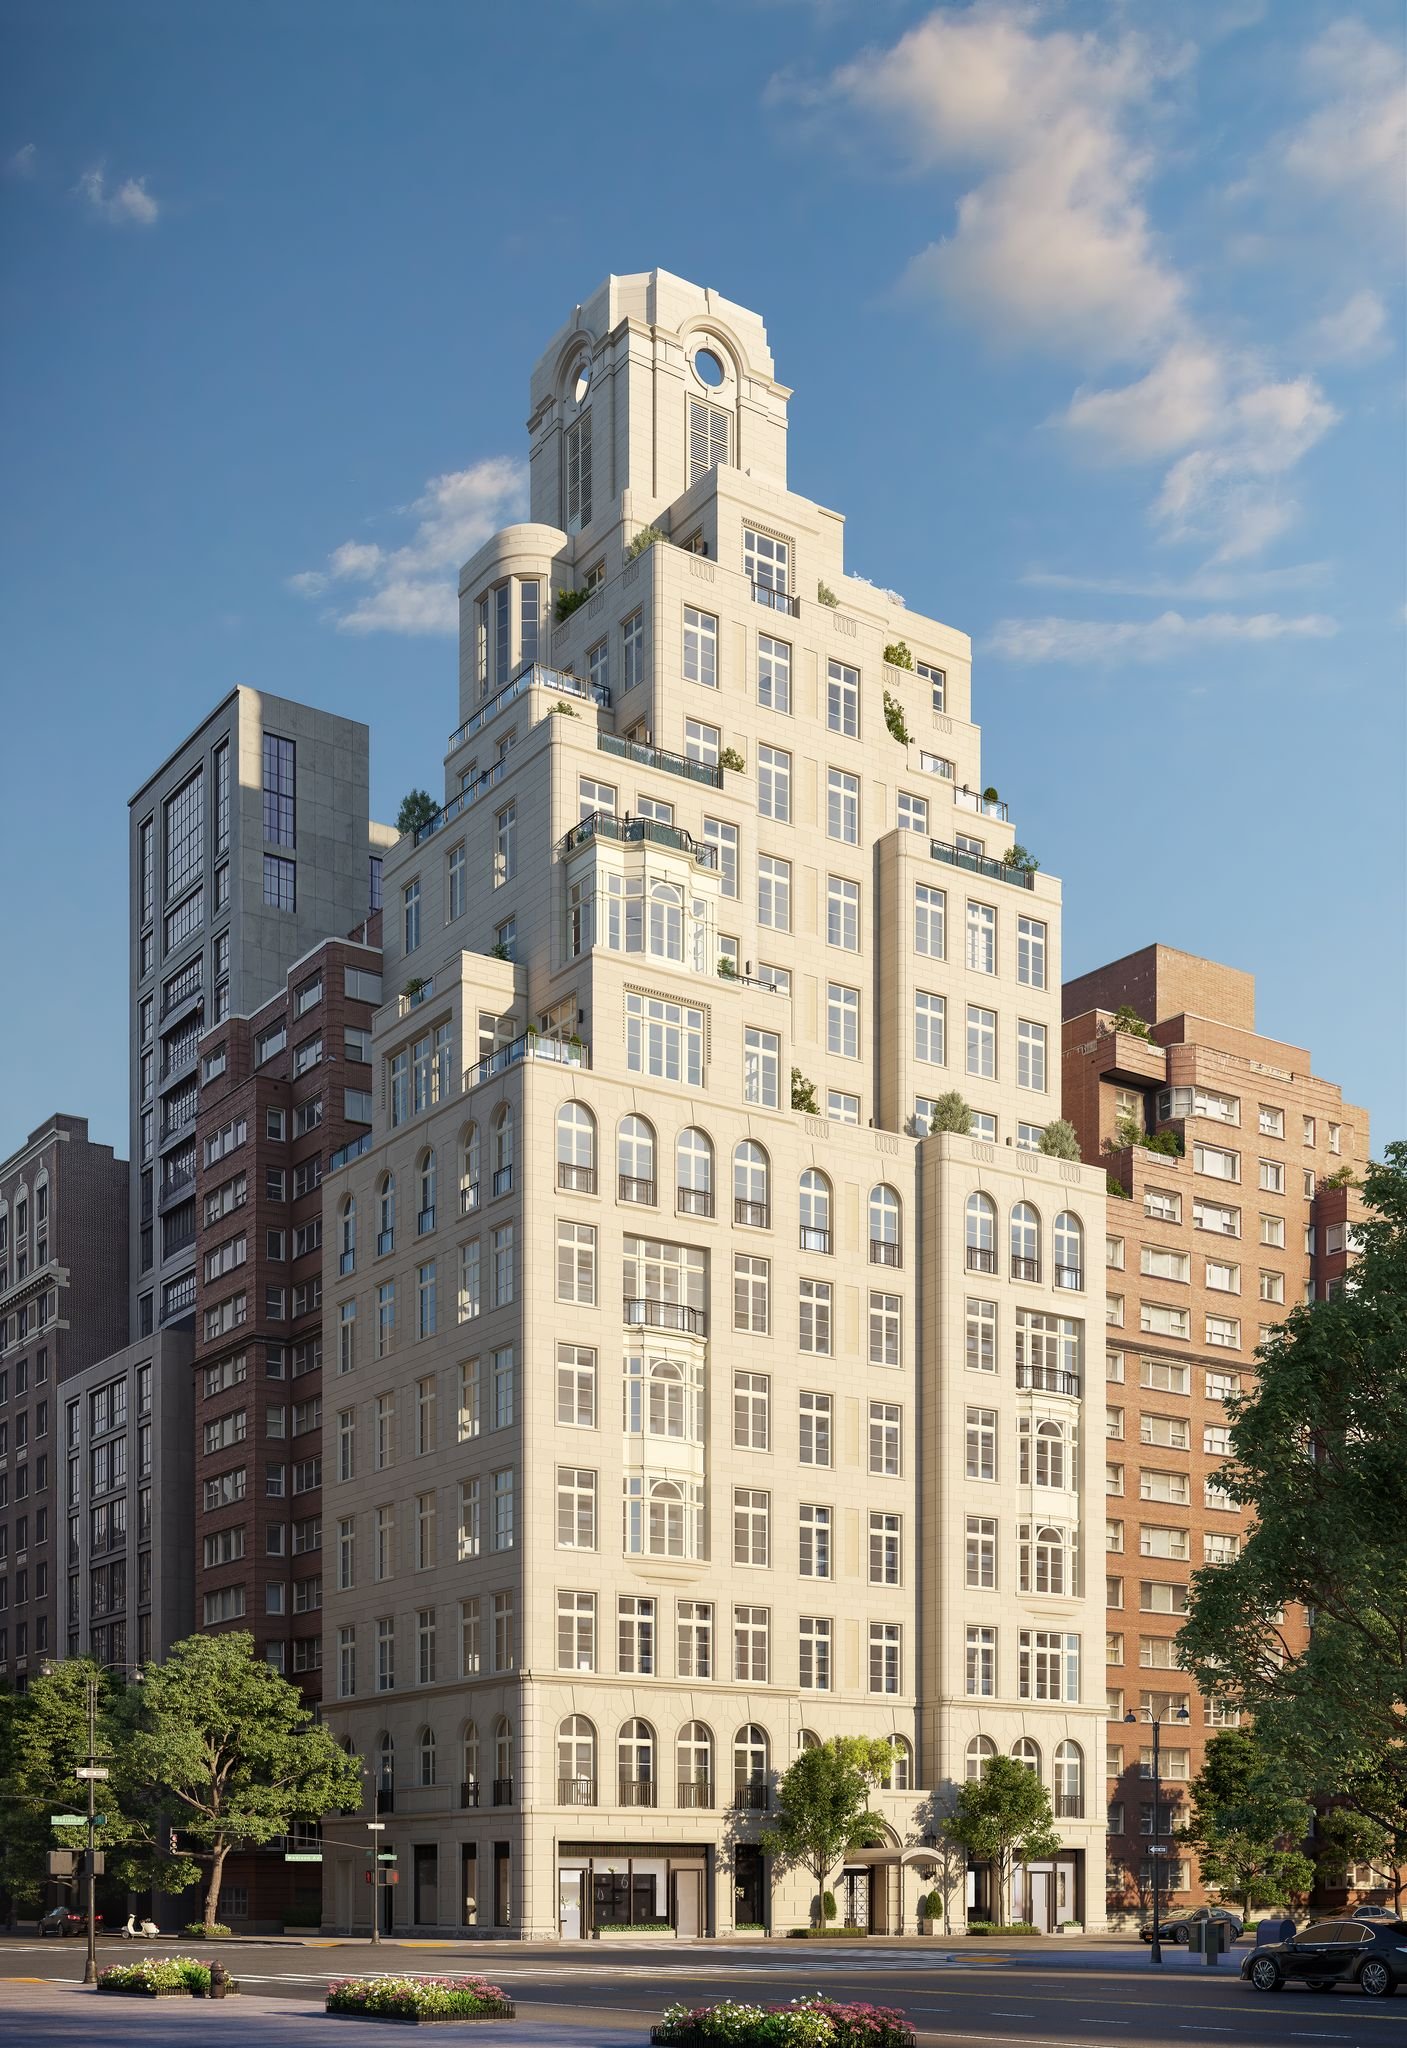  “The Bellemont offers a one-of-a-kind residential experience, and we are pleased to have reached this significant milestone and welcome home our first residents to this timeless Upper East Side building,” said Miki Naftali, CEO and Chairman of Nafta